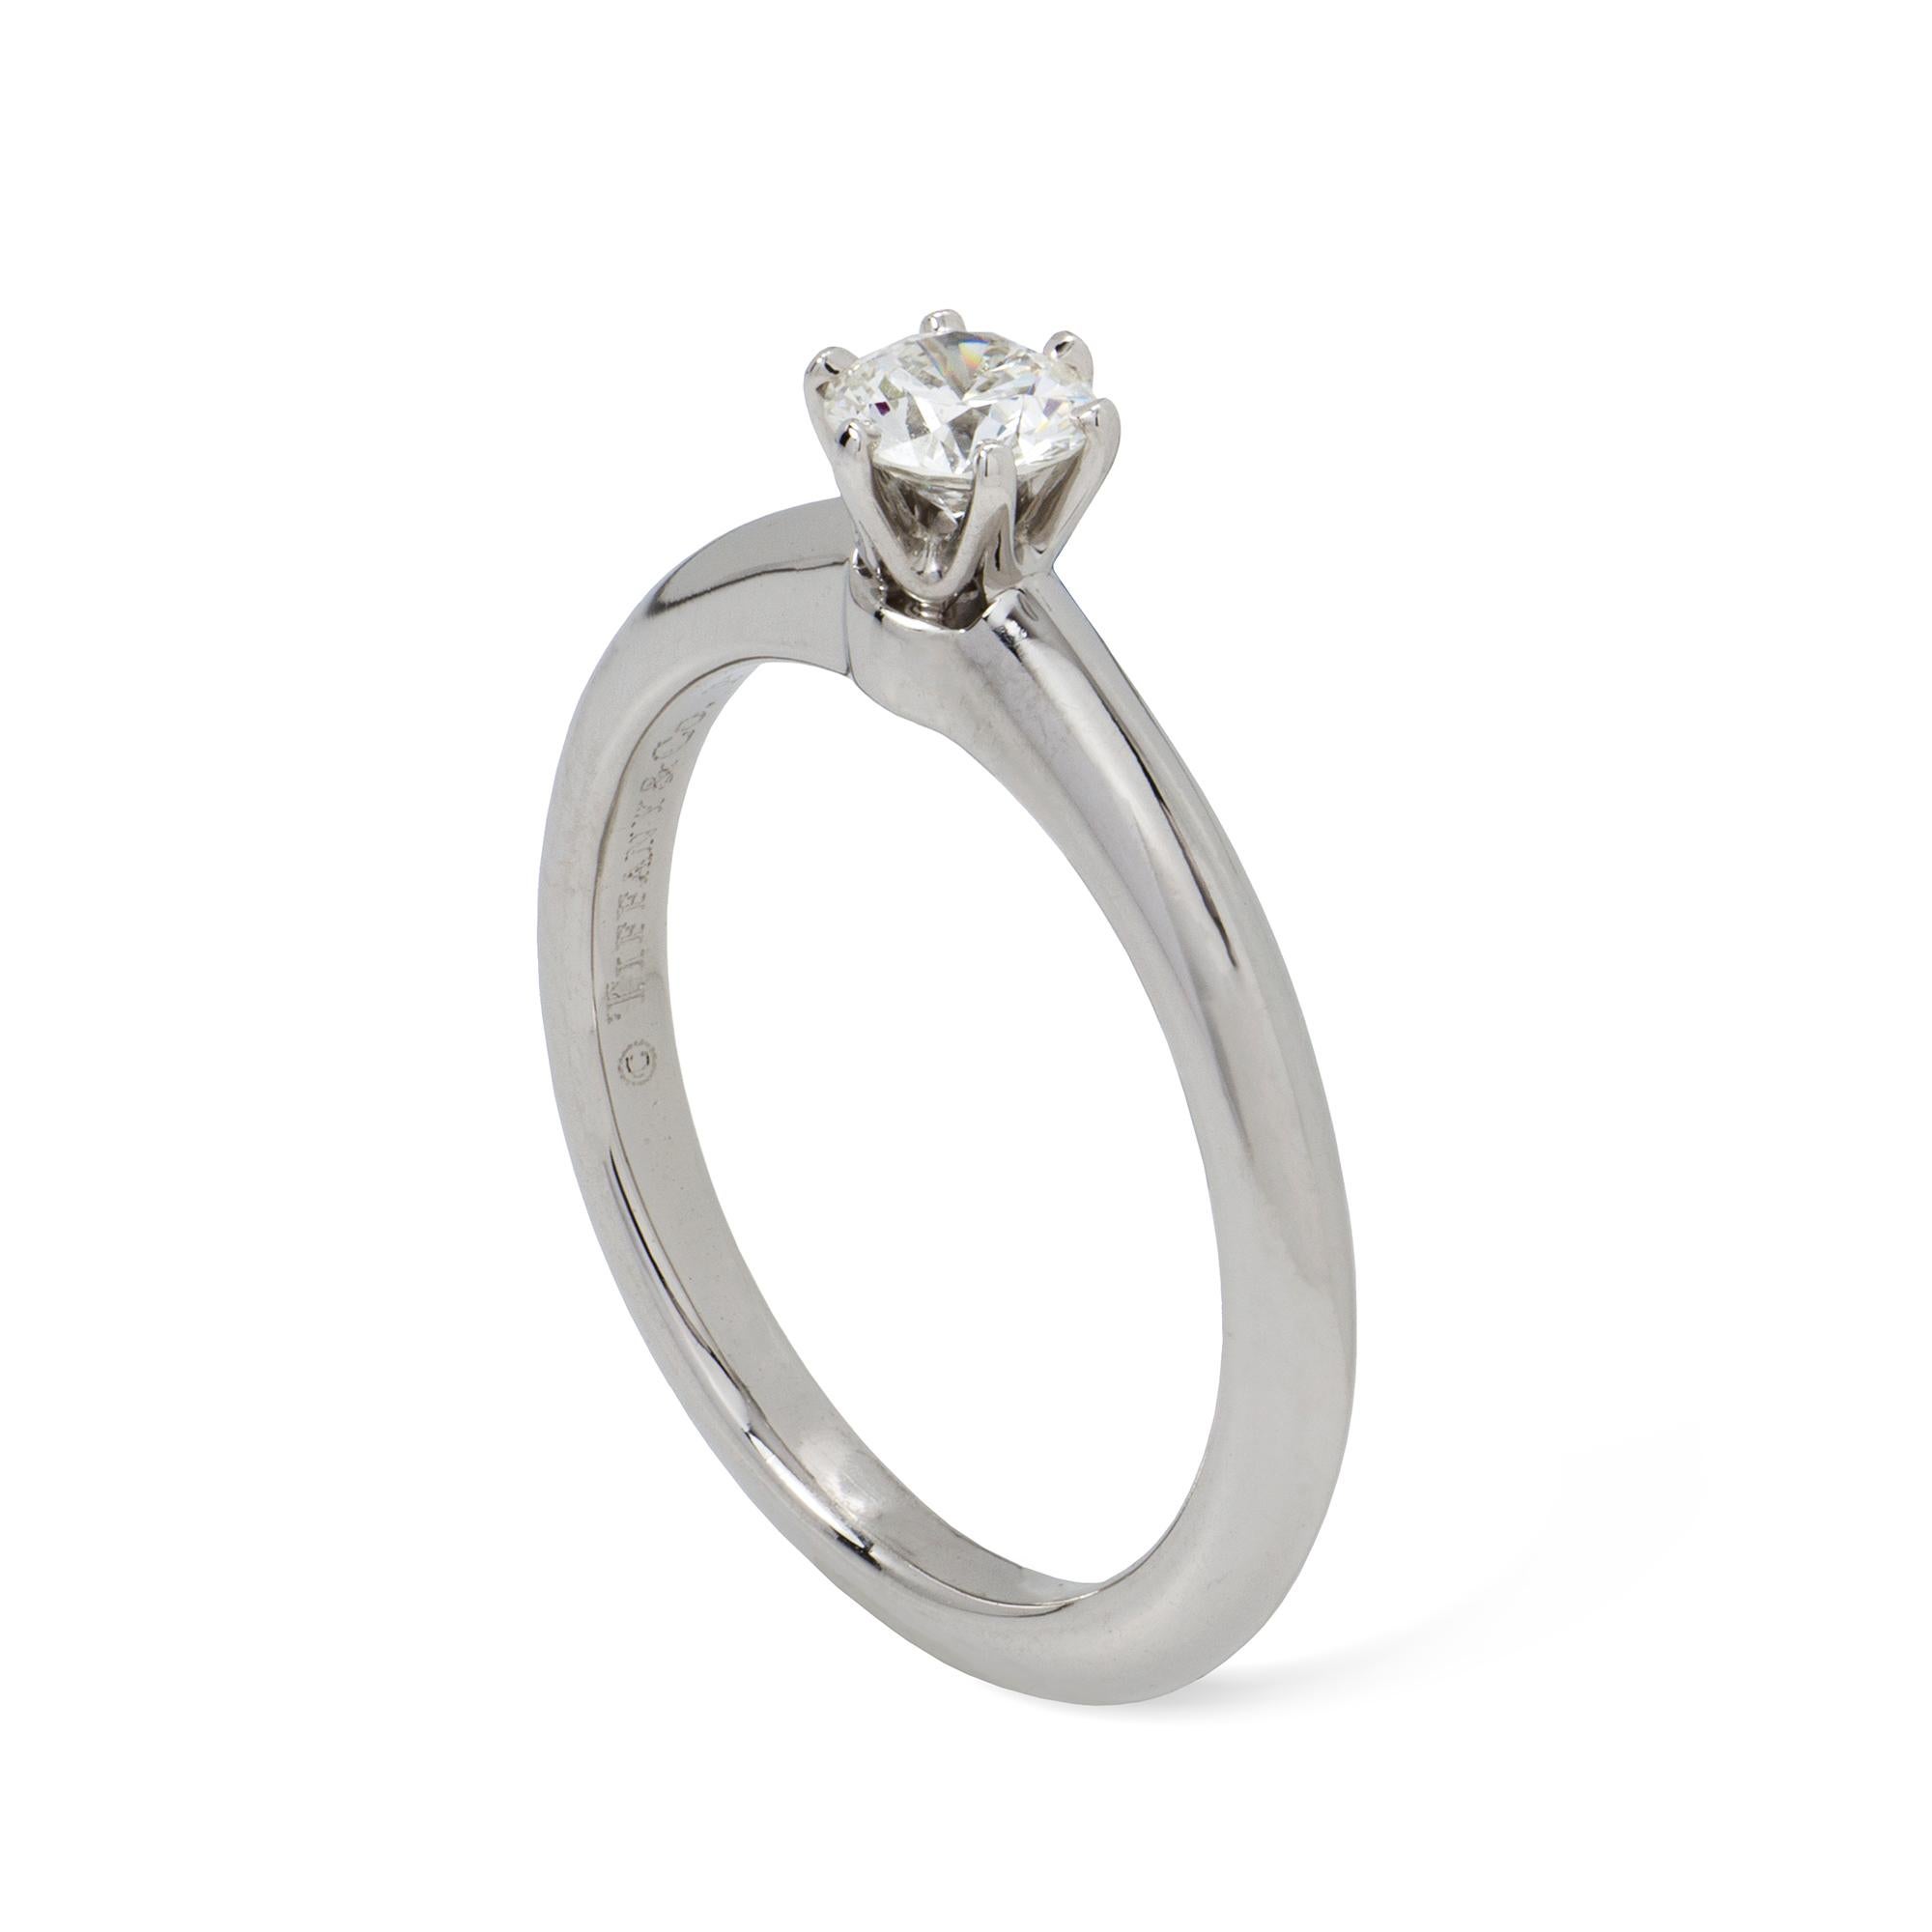 A Tiffany diamond solitaire ring, the round brilliant-cut diamond weighing 0.26 carats, assesed as G colour and VS1 clarity, claw-set to a platinum mount, signed Tiffany, inventory number 24991911, hallmarked platinum 950, London 2009,  finger size